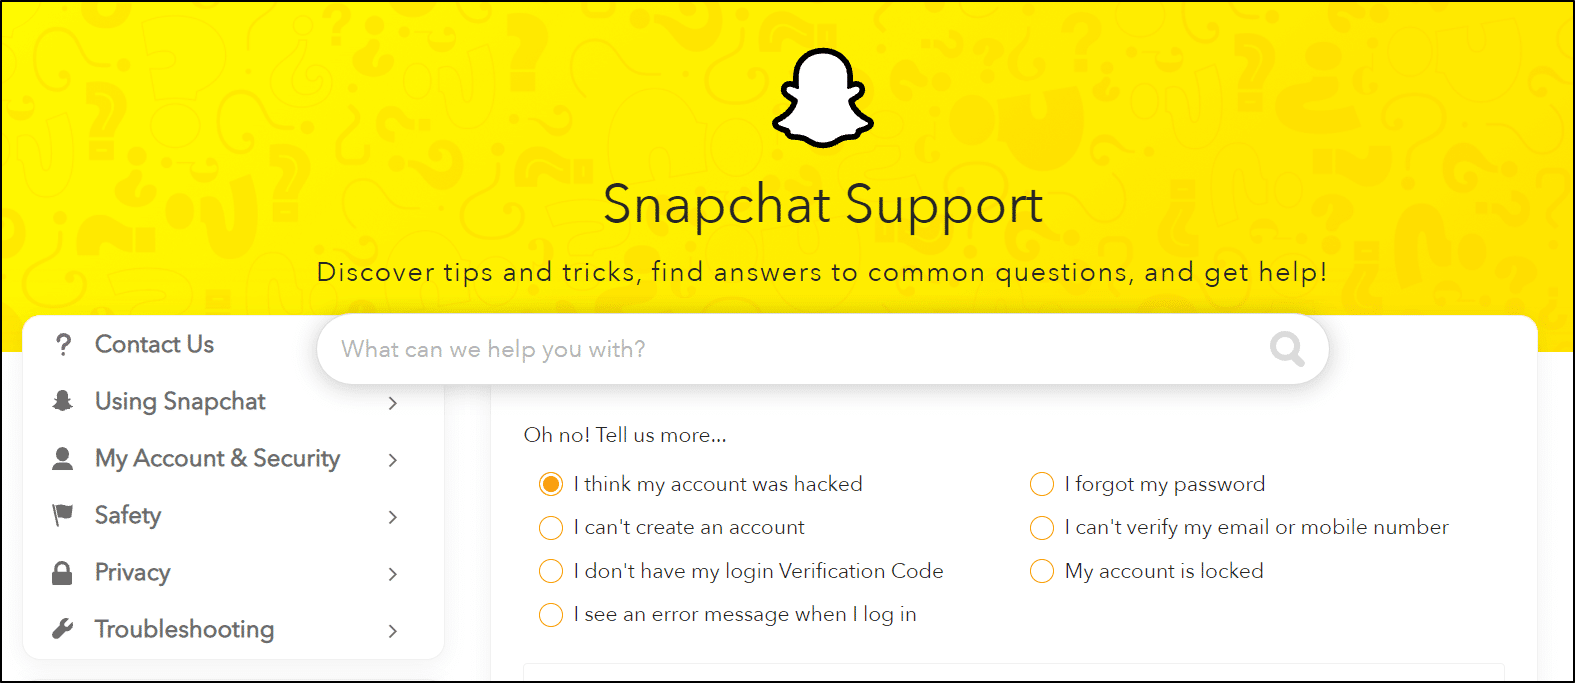 Report login problem to Snapchat Support through their official support website to fix can't log in, sign in to Snapchat, password not working, or Could Not Connect error